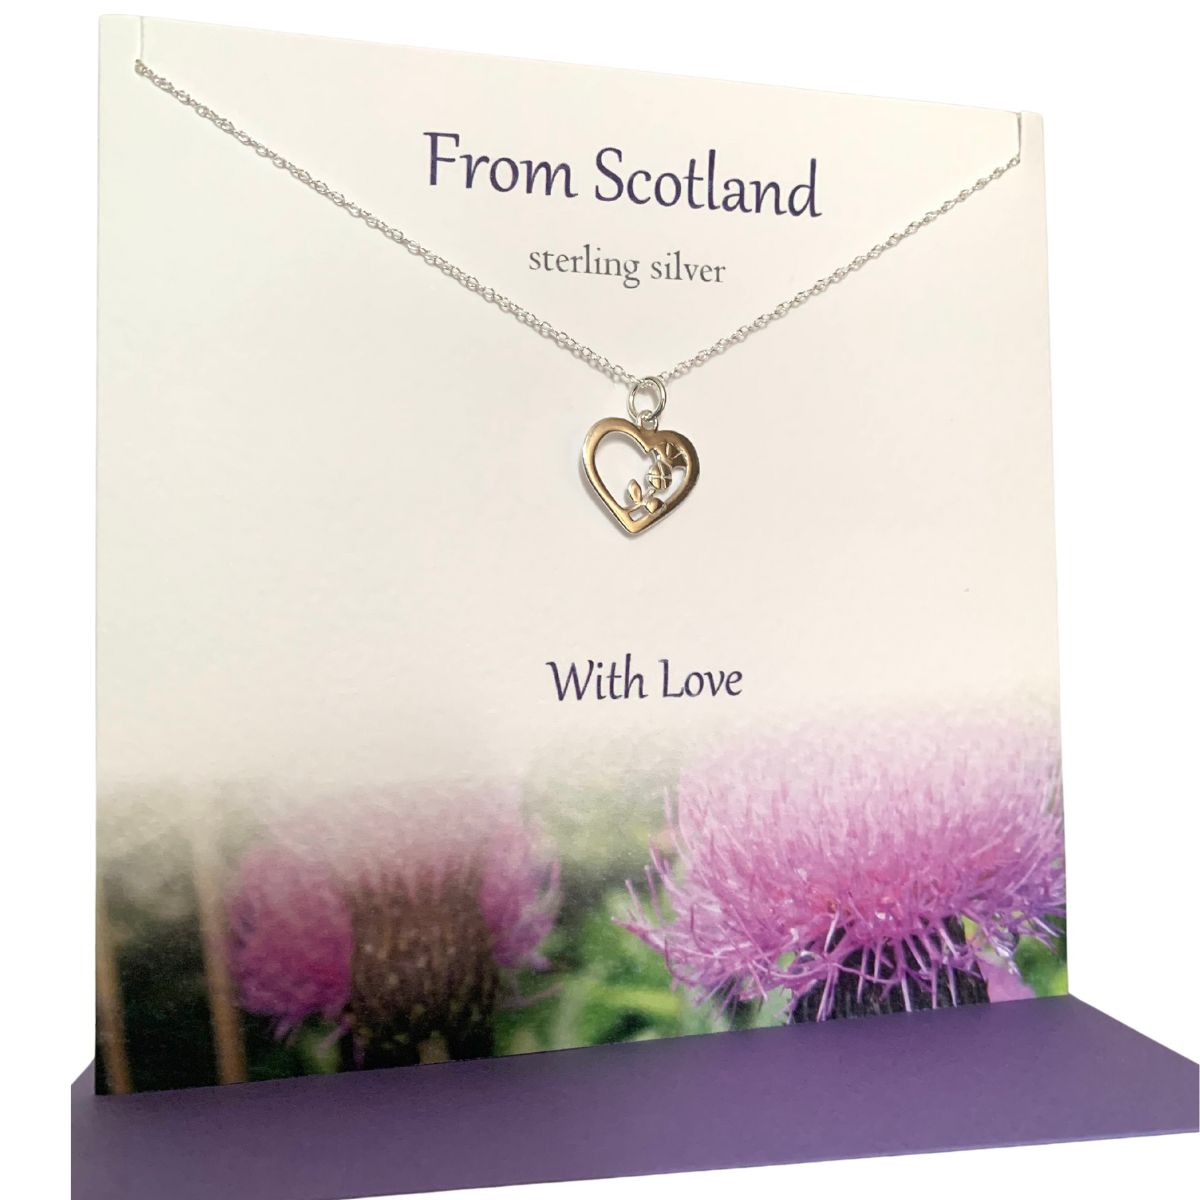 Heart shaped silver pendant necklace entwined with a thistle on a greeting card with purple thistles along the bottom border. The card says From Scotland With Love